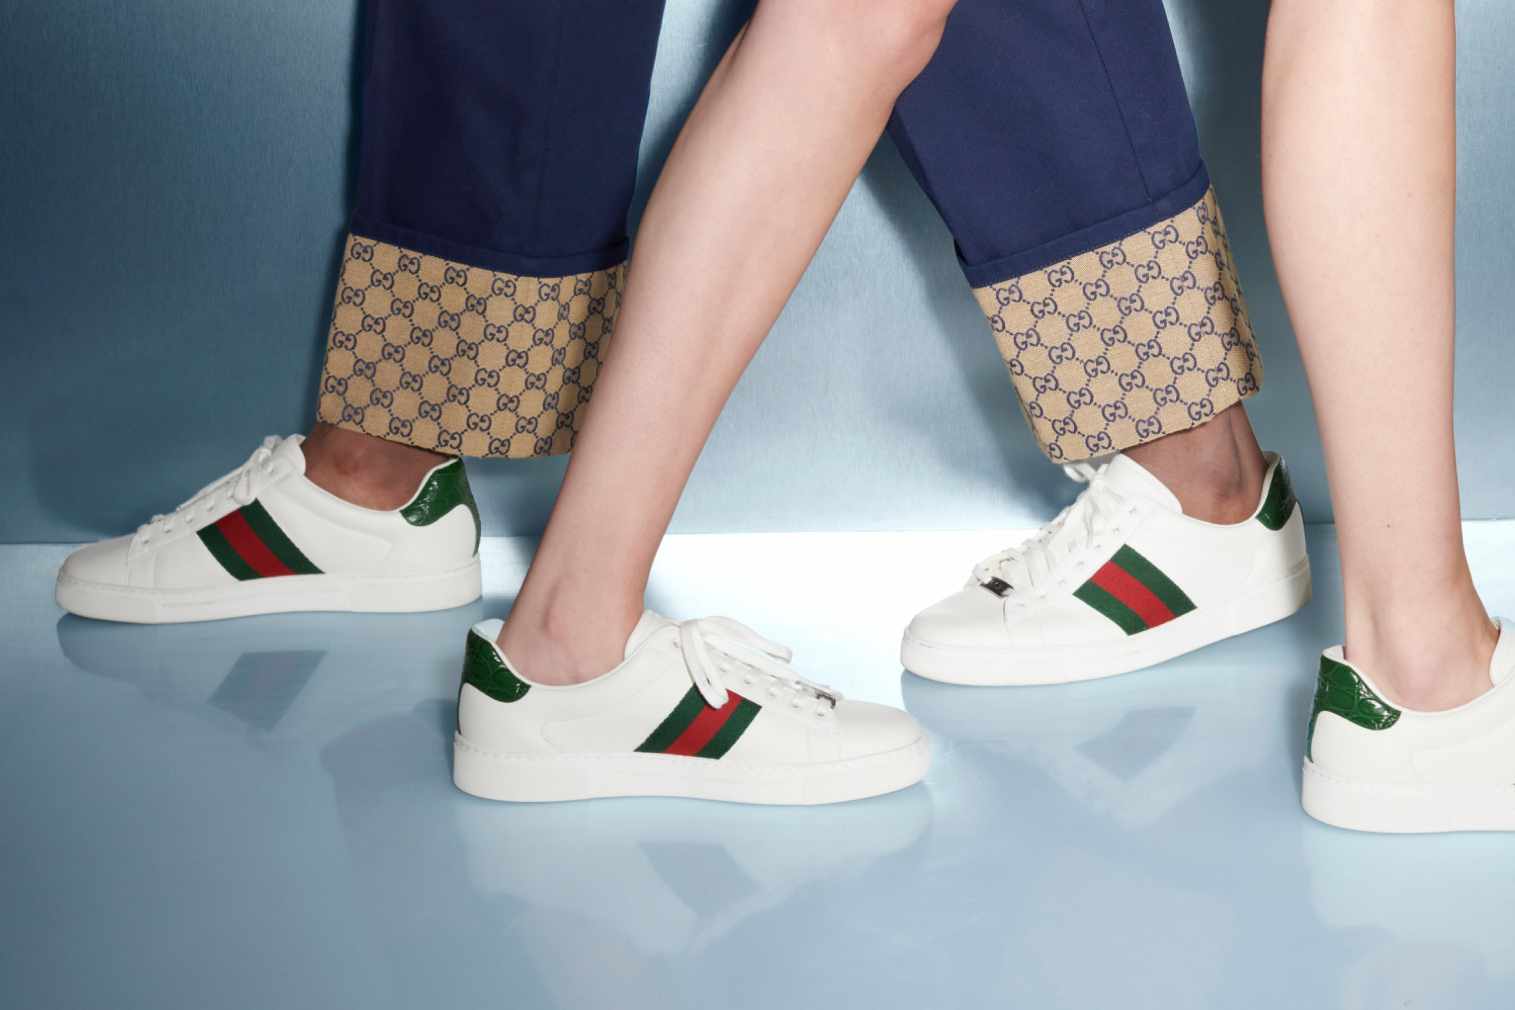 Celebrity Style: Gucci Releases Ace Sneakers With Removable Patches